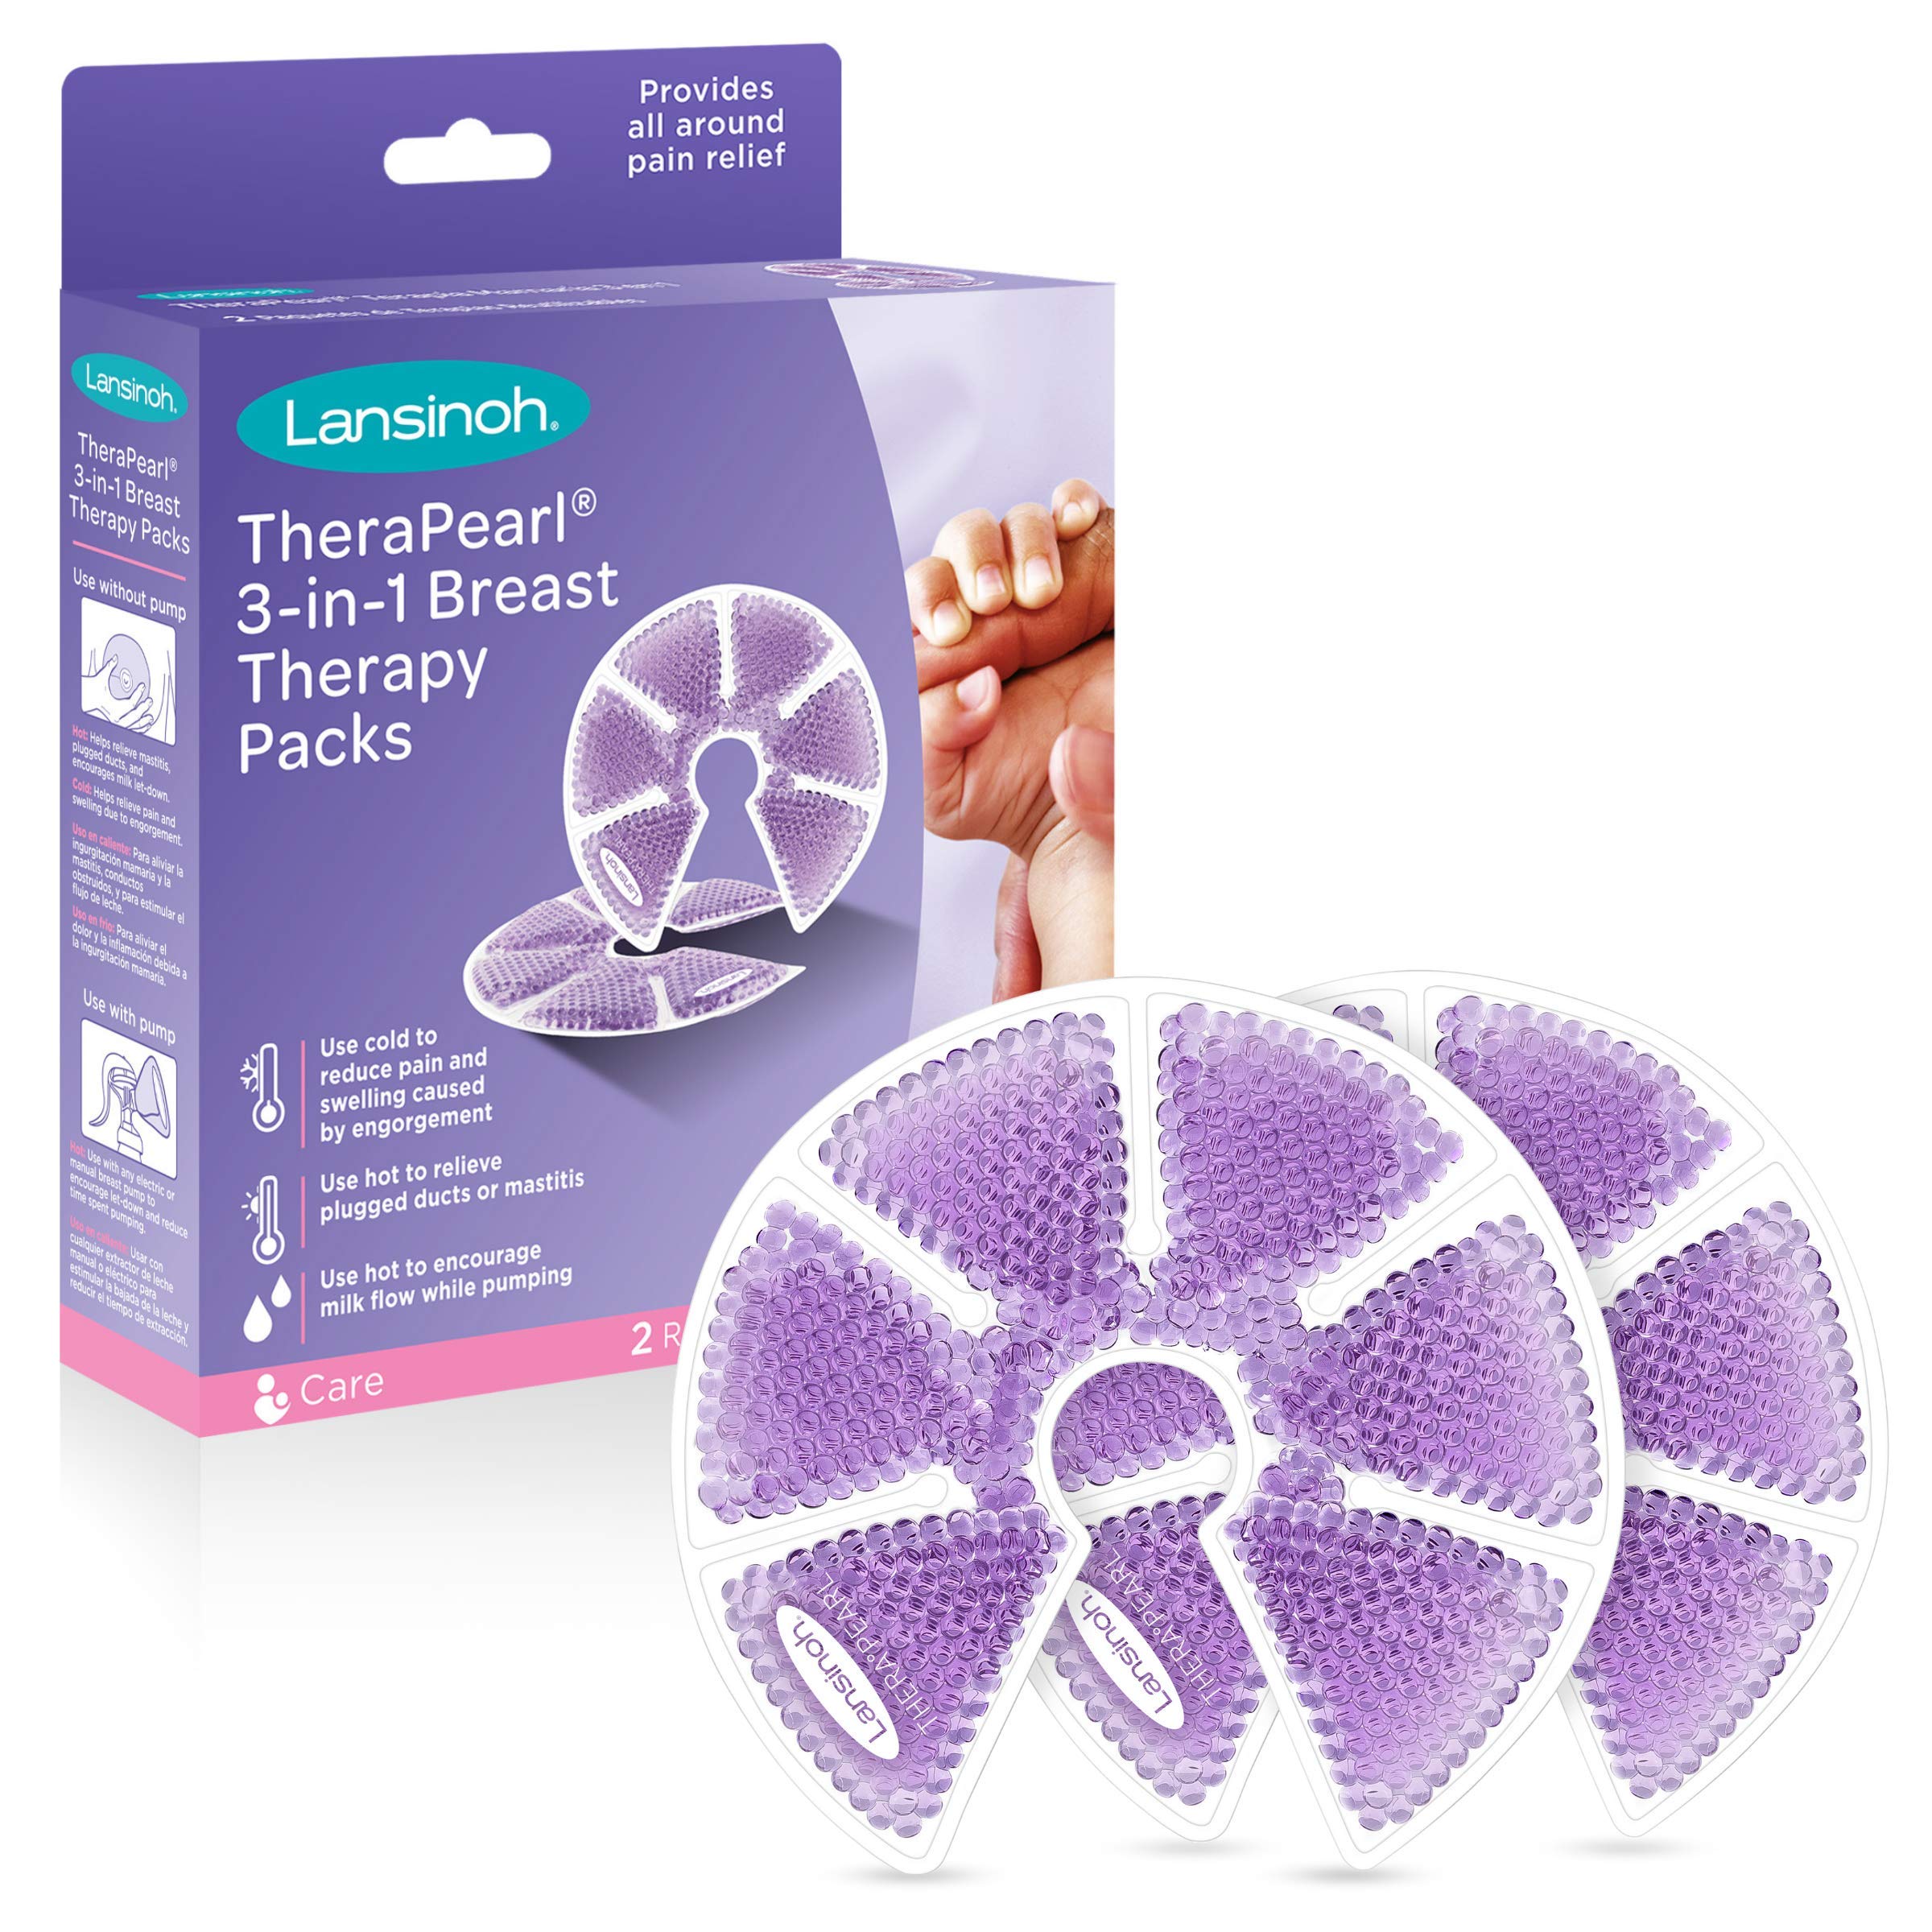 Lansinoh TheraPearl 3-in-1 breast therapy 2 reusable packs, NIB